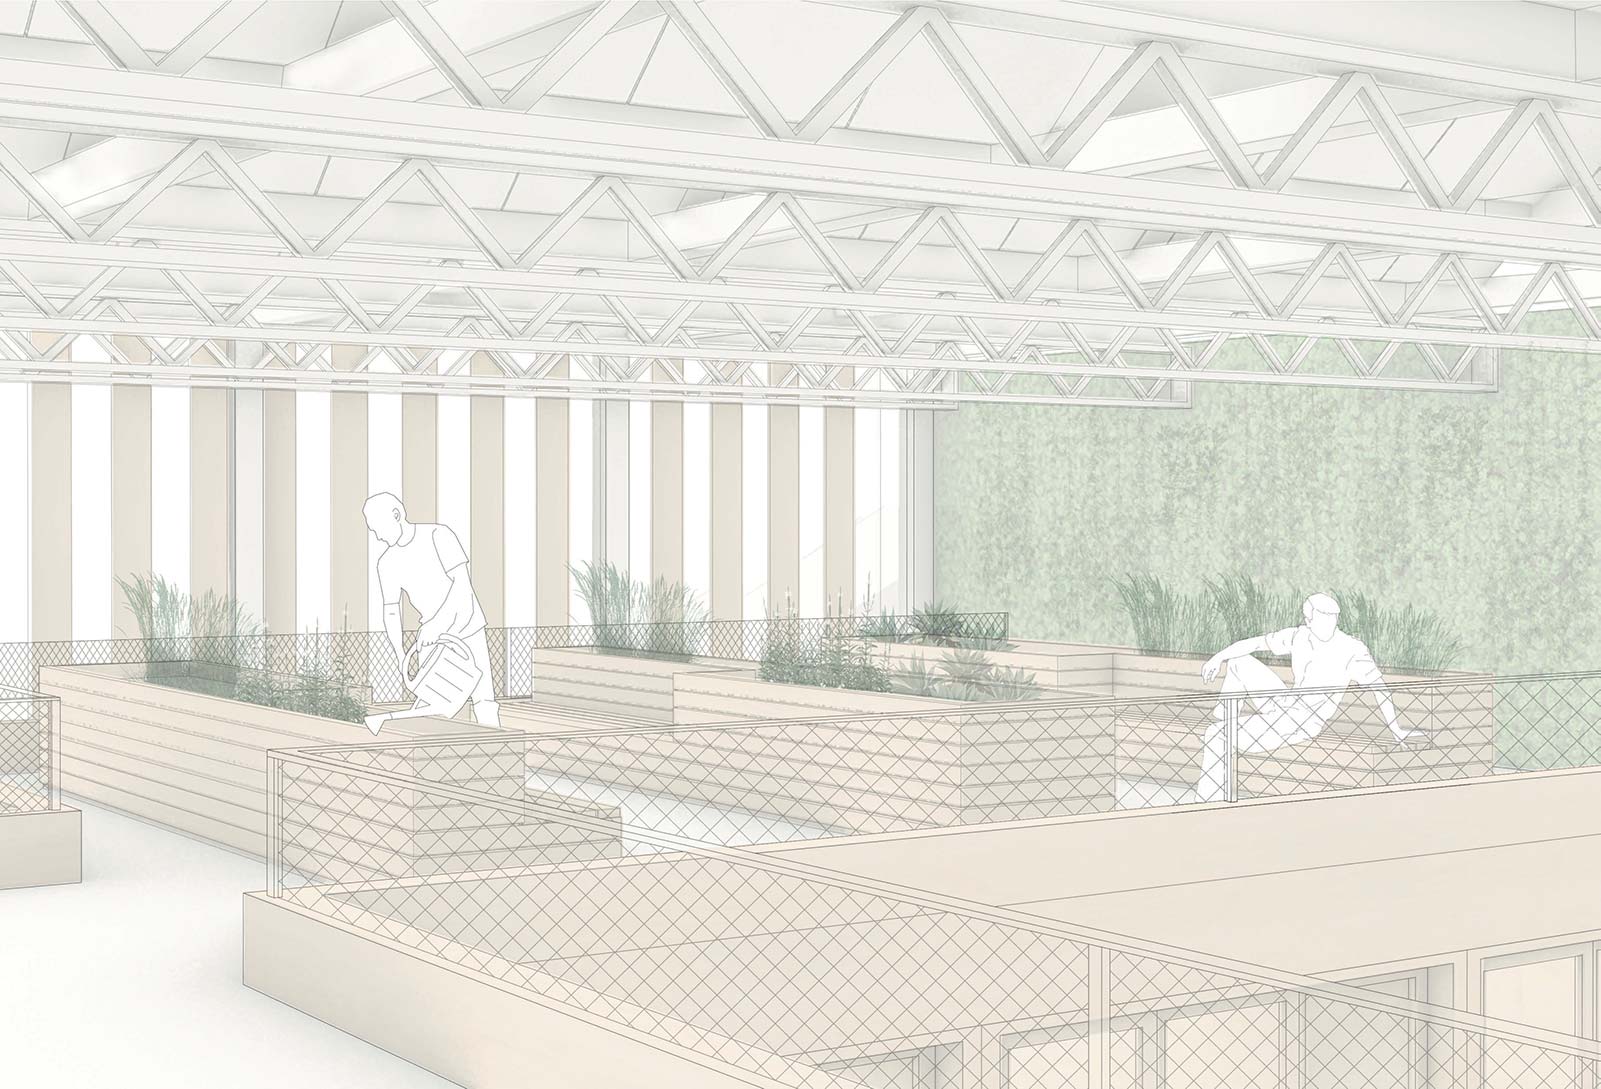 Rendering of the Roof Terrace